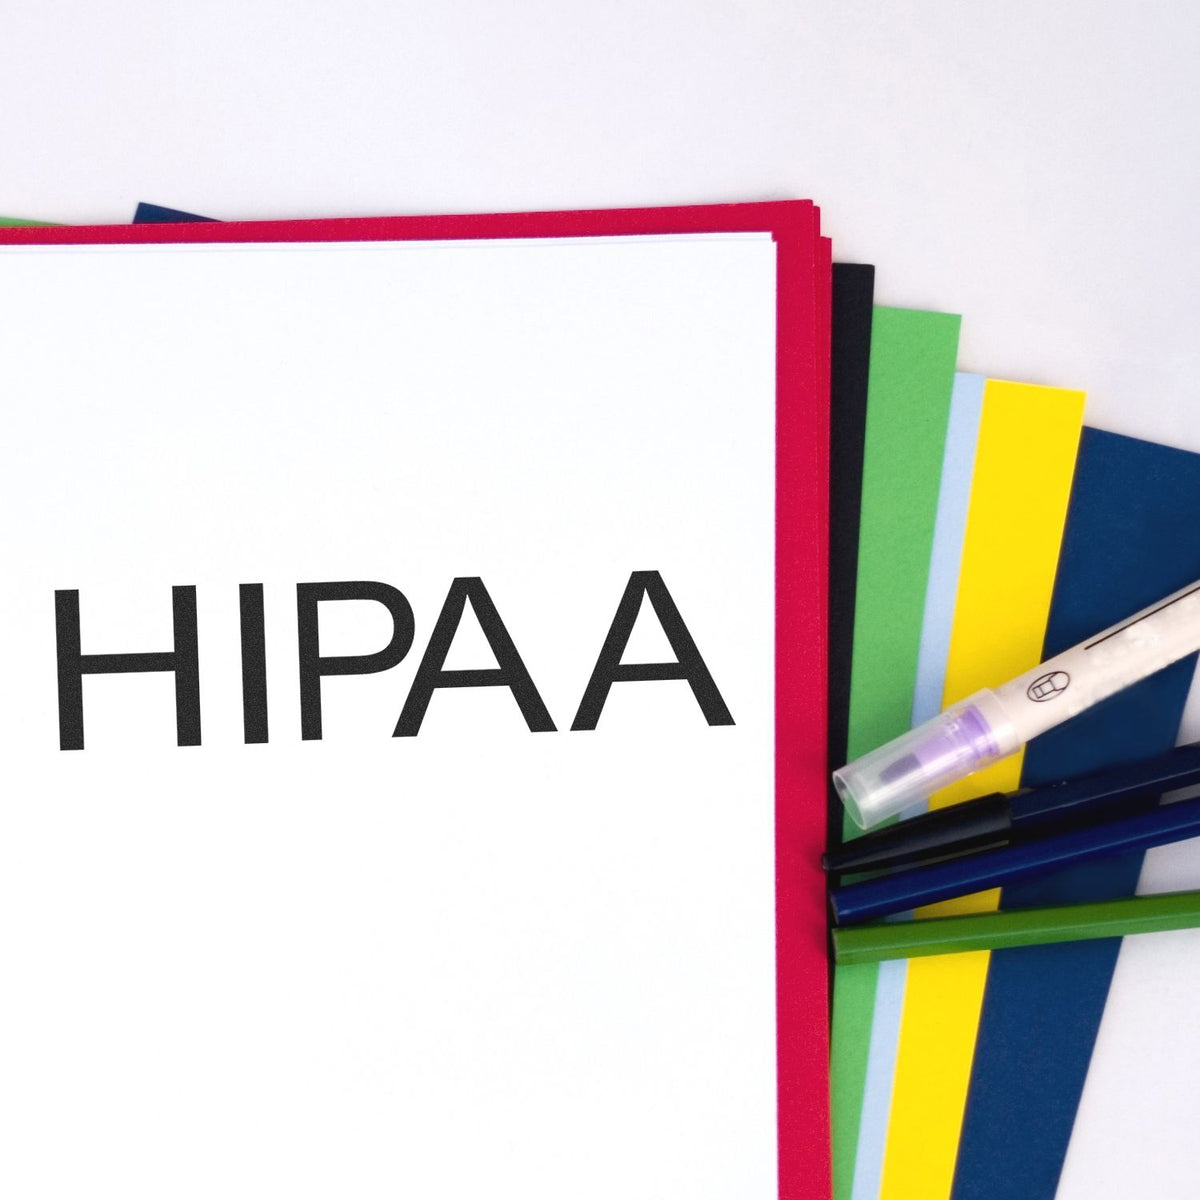 Hipaa Medical Rubber Stamp Lifestyle Photo